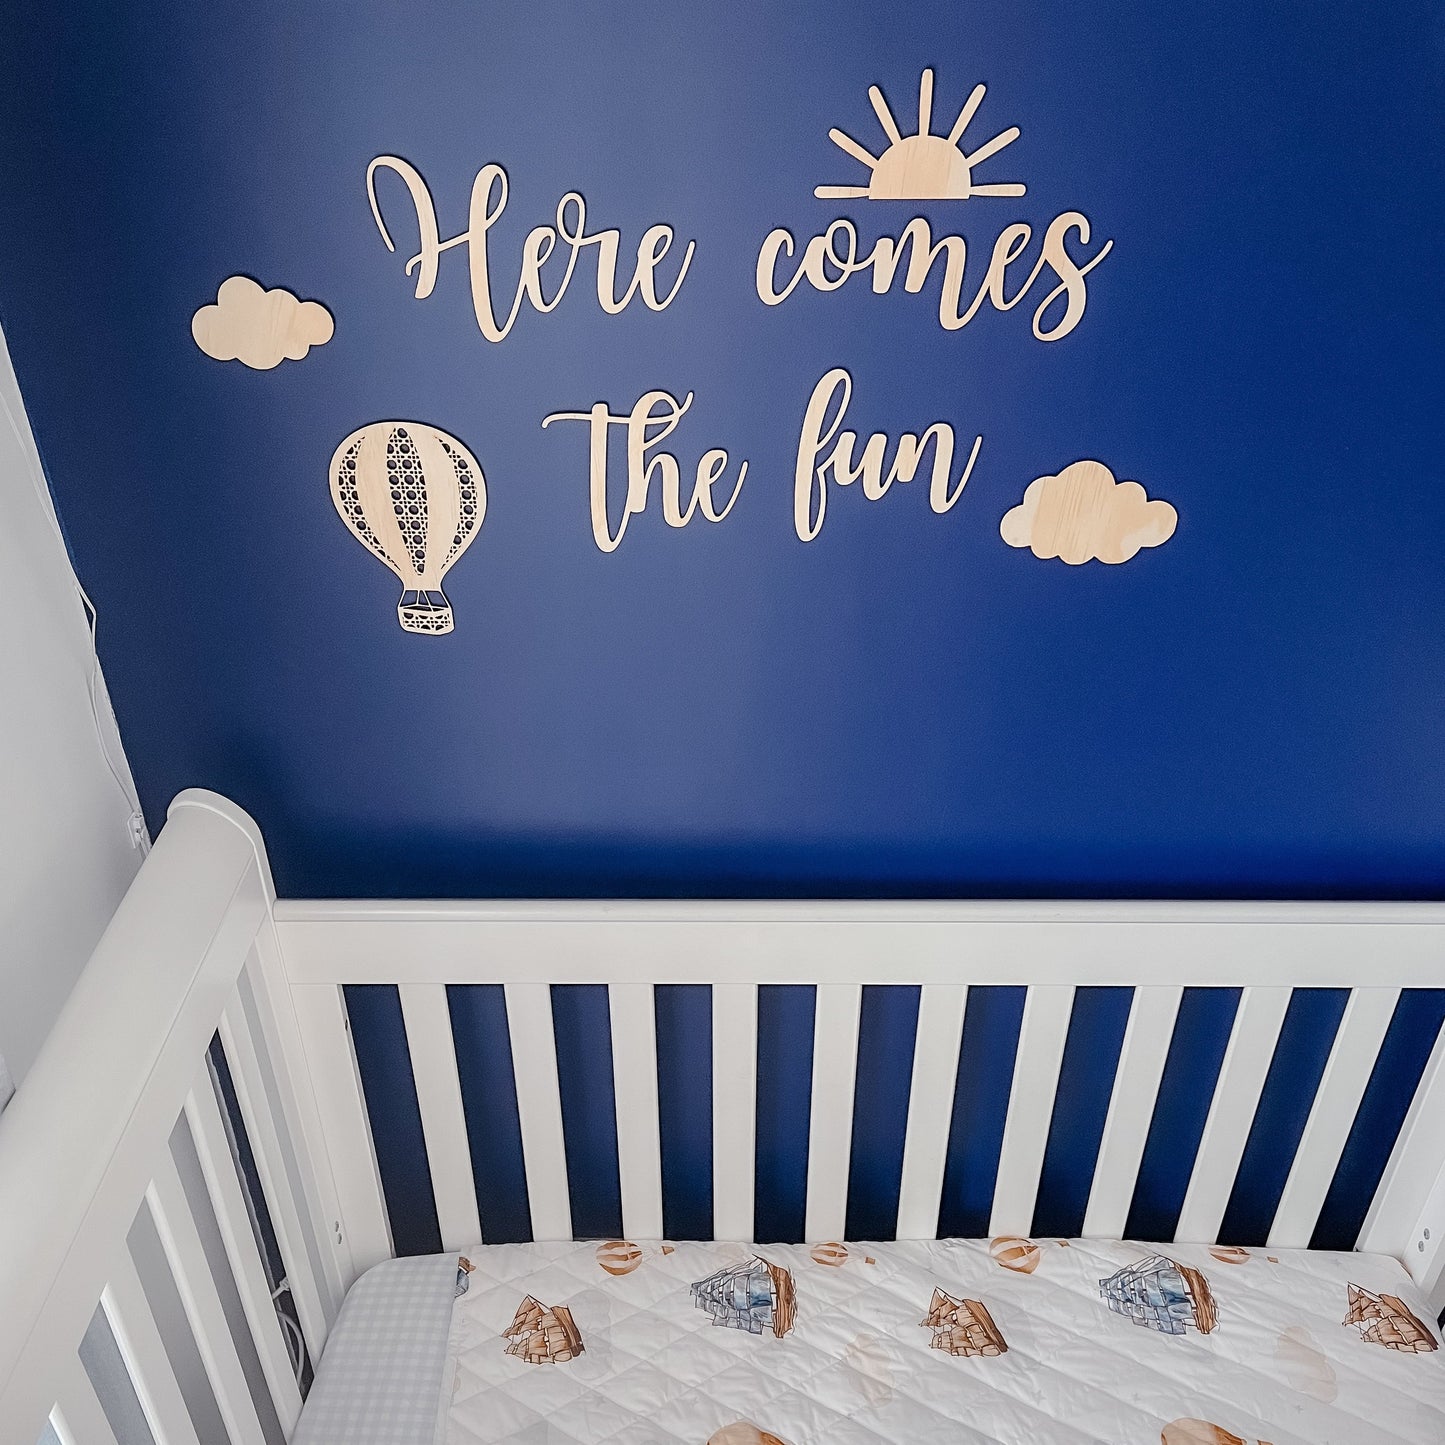 Wooden Wall Script - Here comes the fun